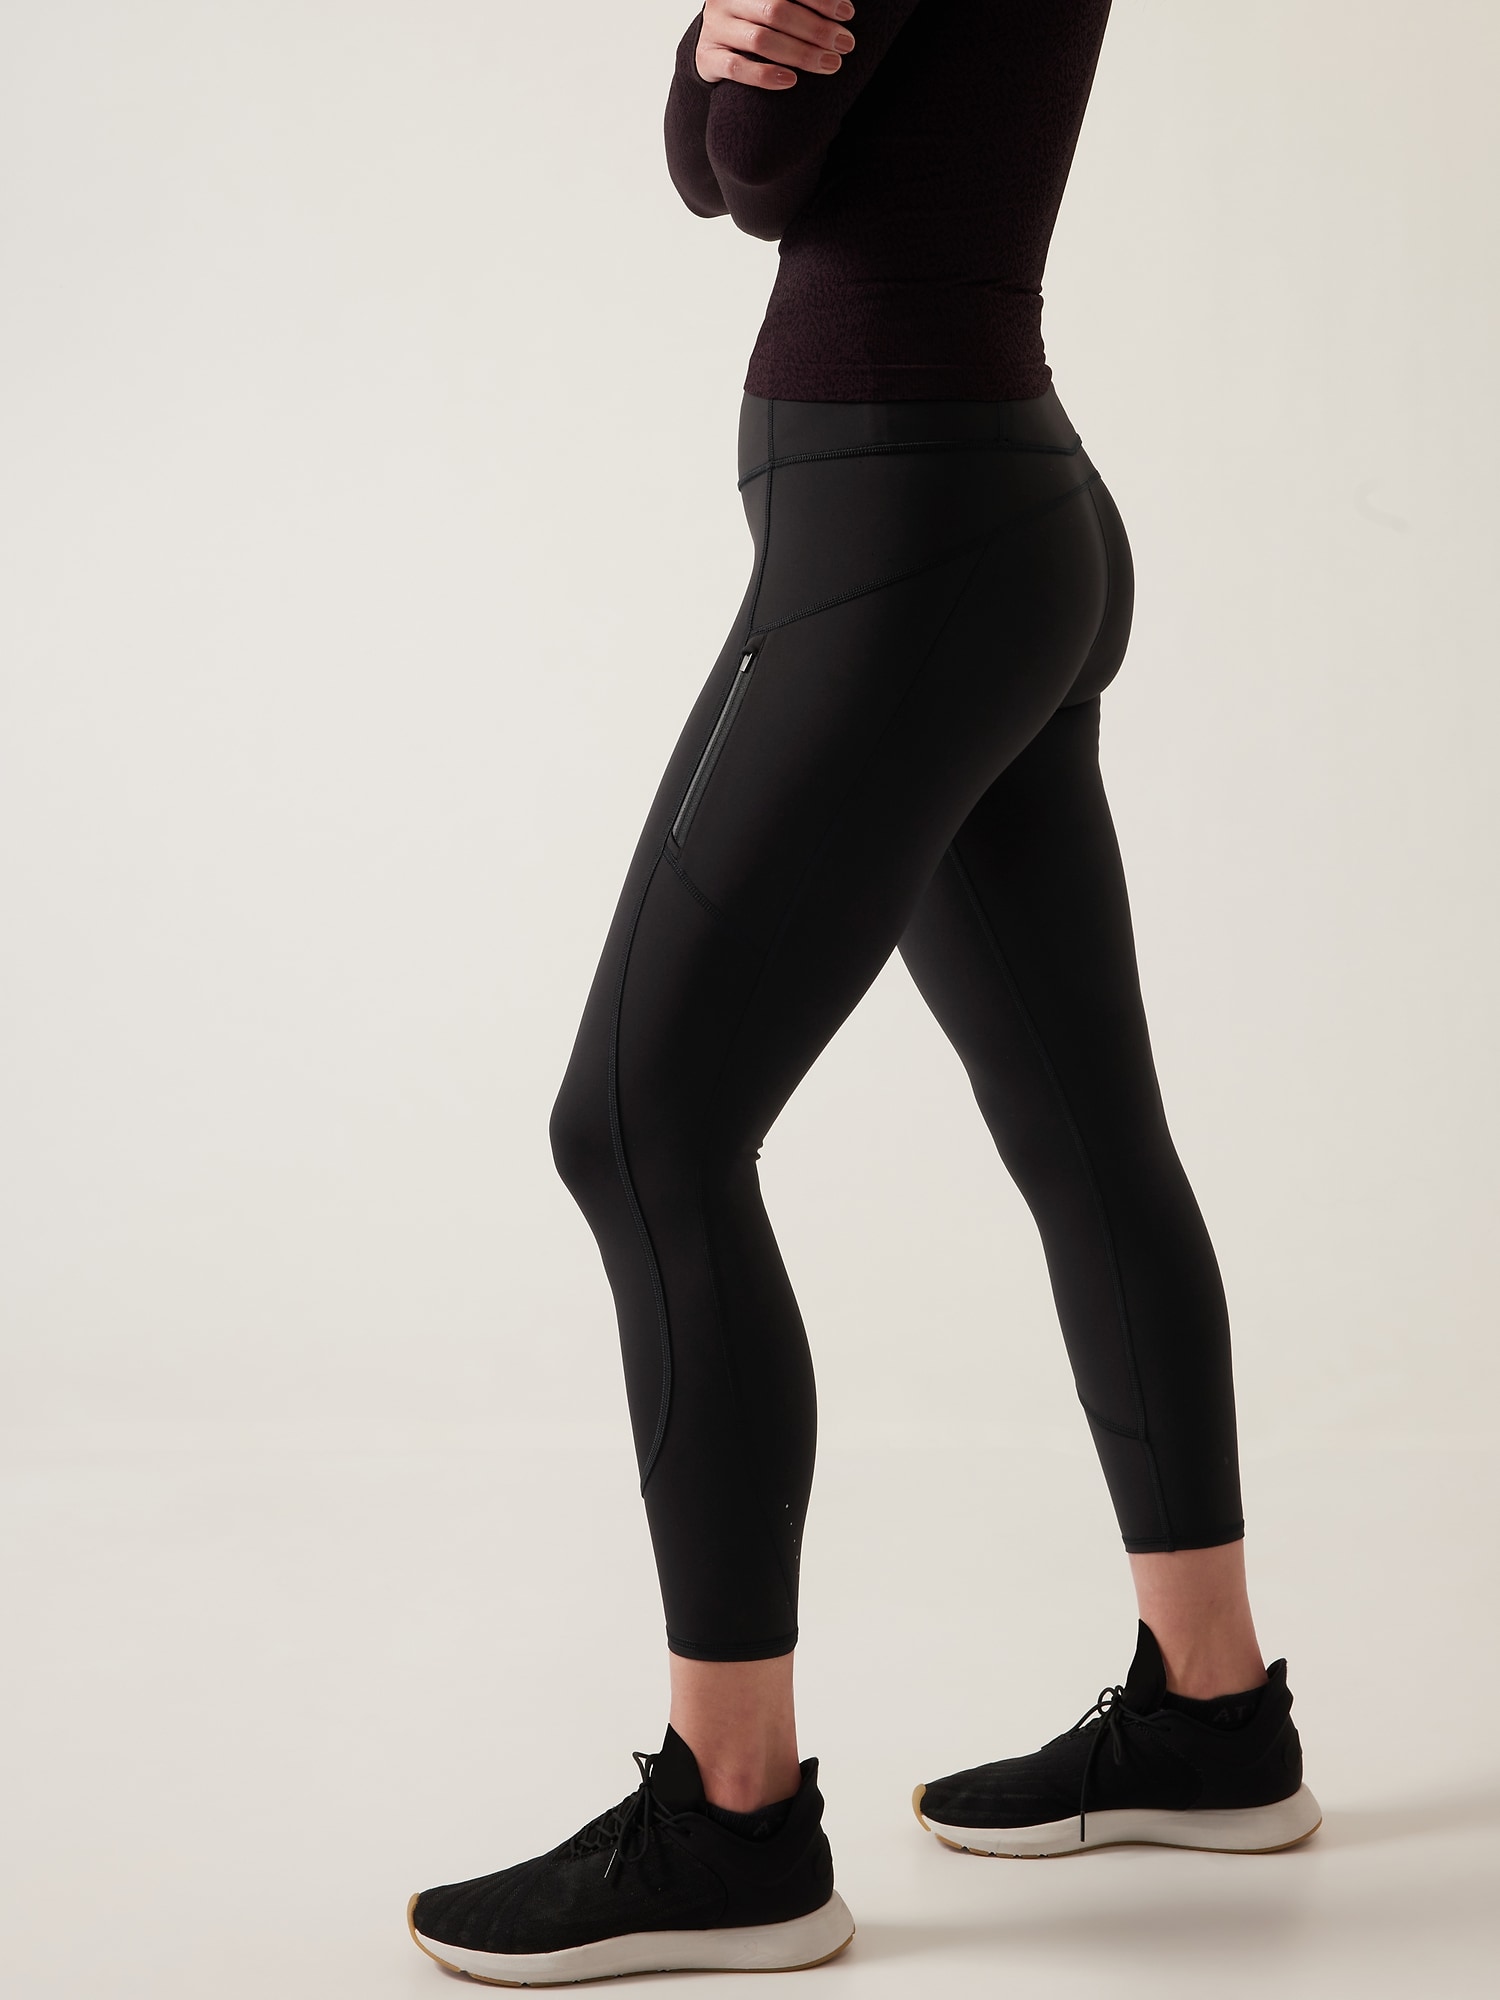 LULULEMON Fast and Free 7/8 Tight 25 (Black (Non-Reflective), 4)